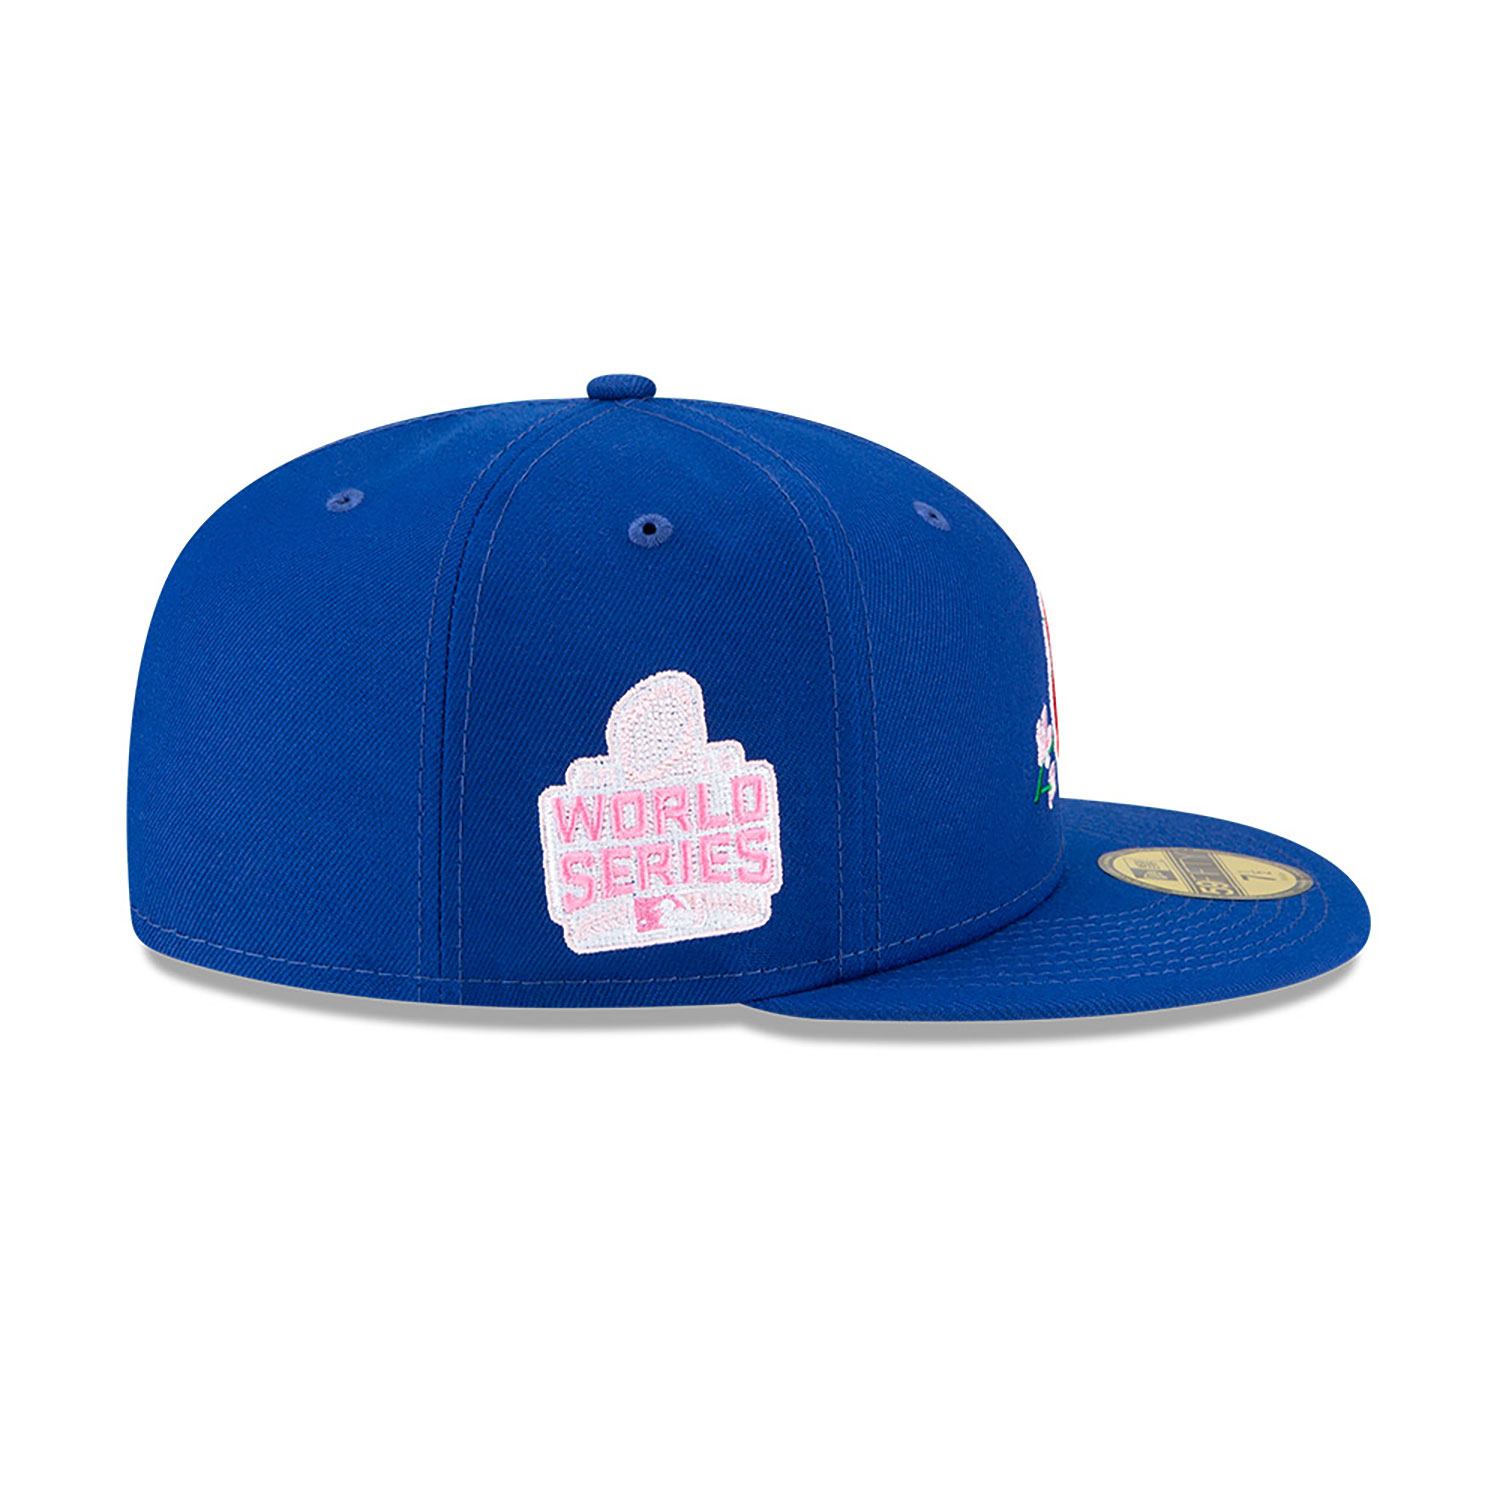 Kansas City Royals Hat Cap 7 1/2 Exclusive New Era Fitted Patch UV Red